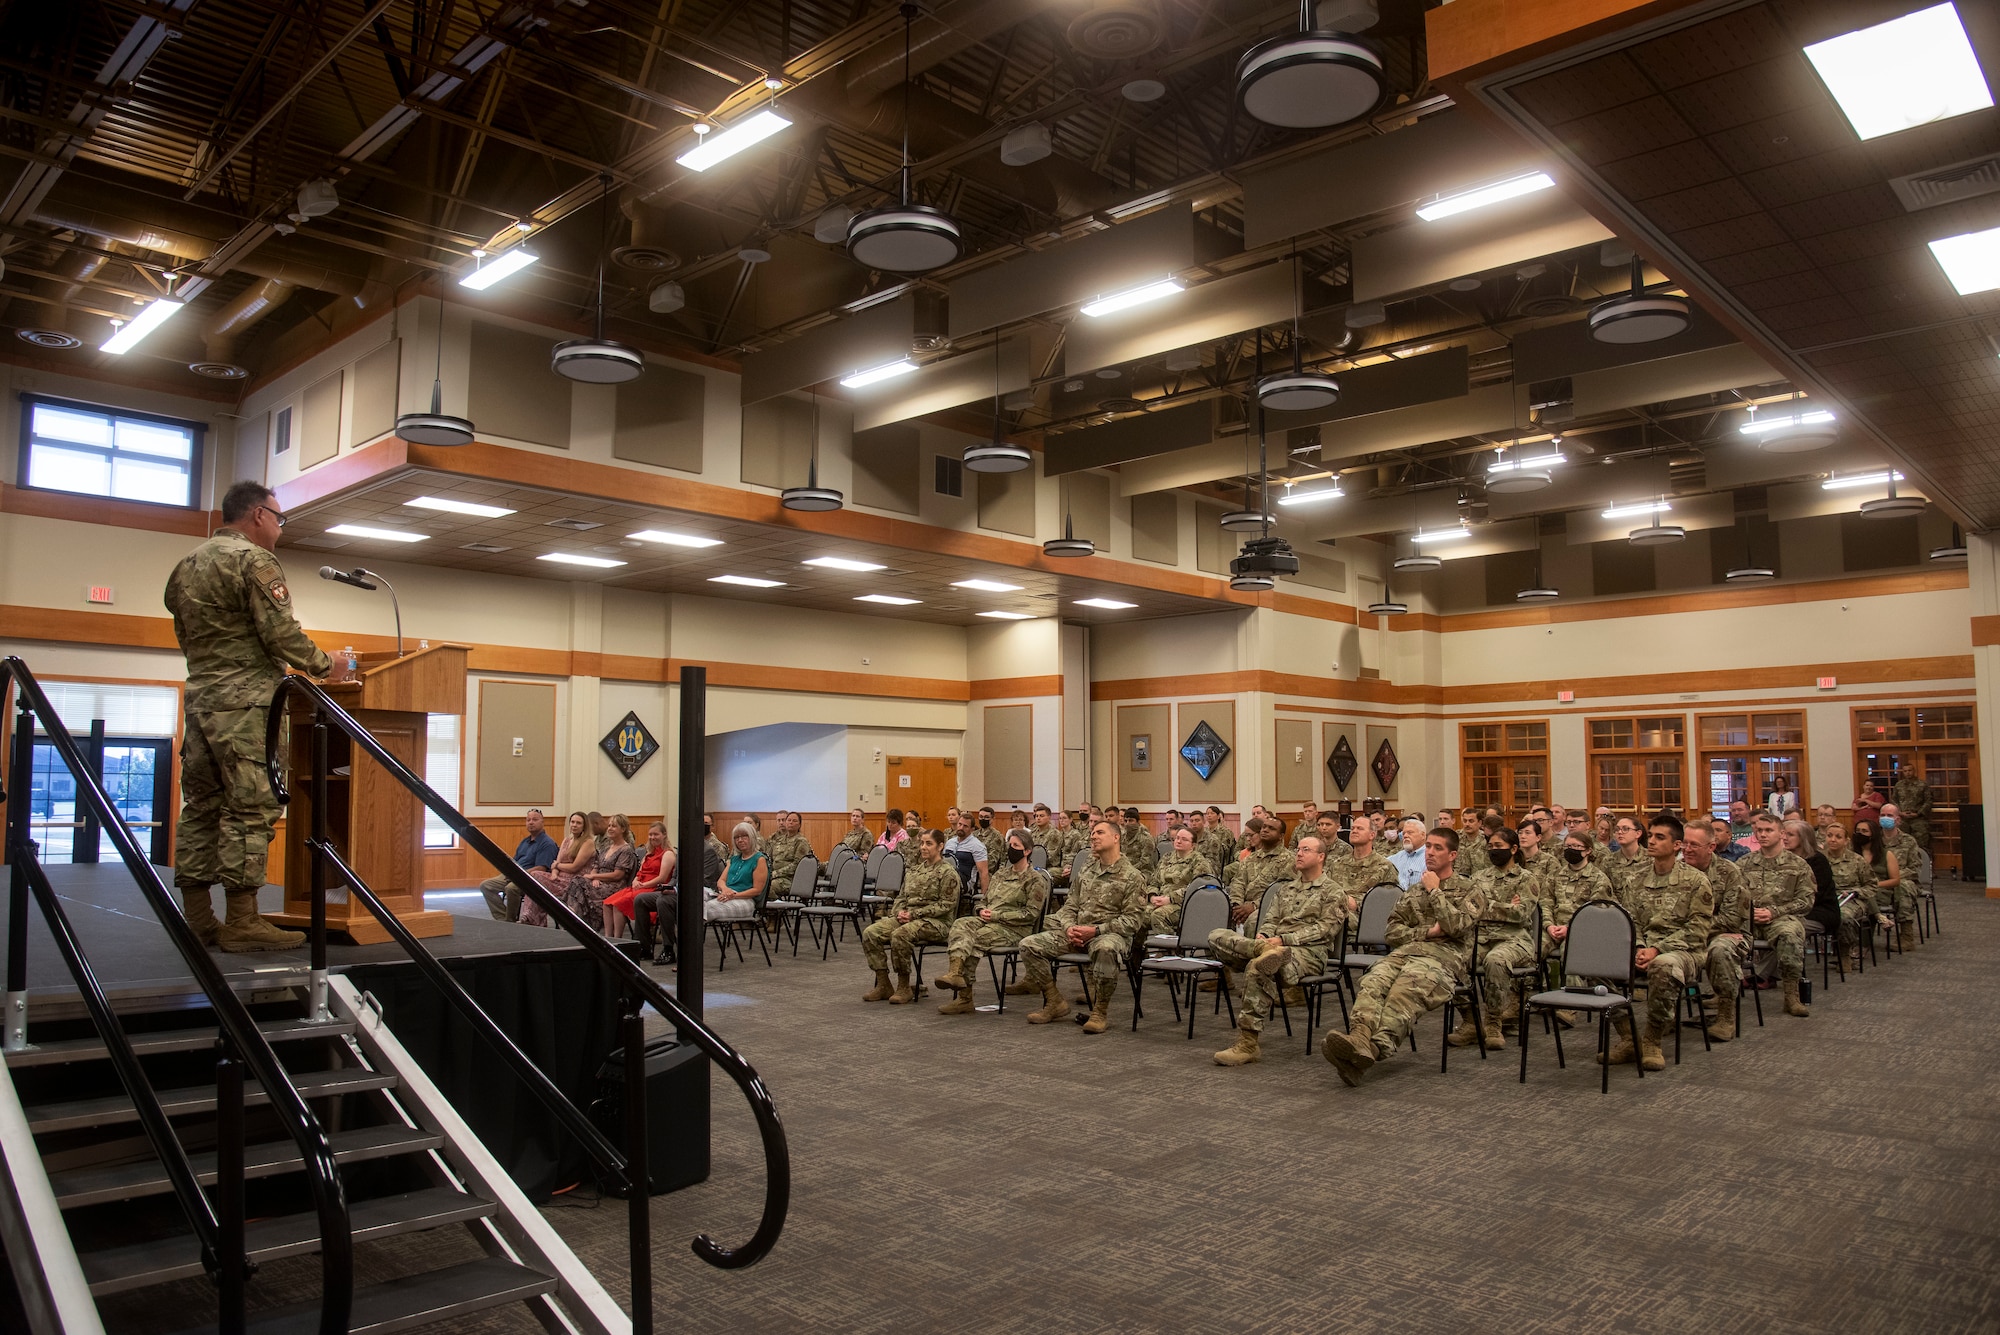 Members of the 341st Operational Medical Readiness Squadron listen to Lt. Col. Darren Damiani, 341st OMRS incoming commander, present remarks after assuming command June 16, 2021 at Malmstrom Air Force Base, Mont.